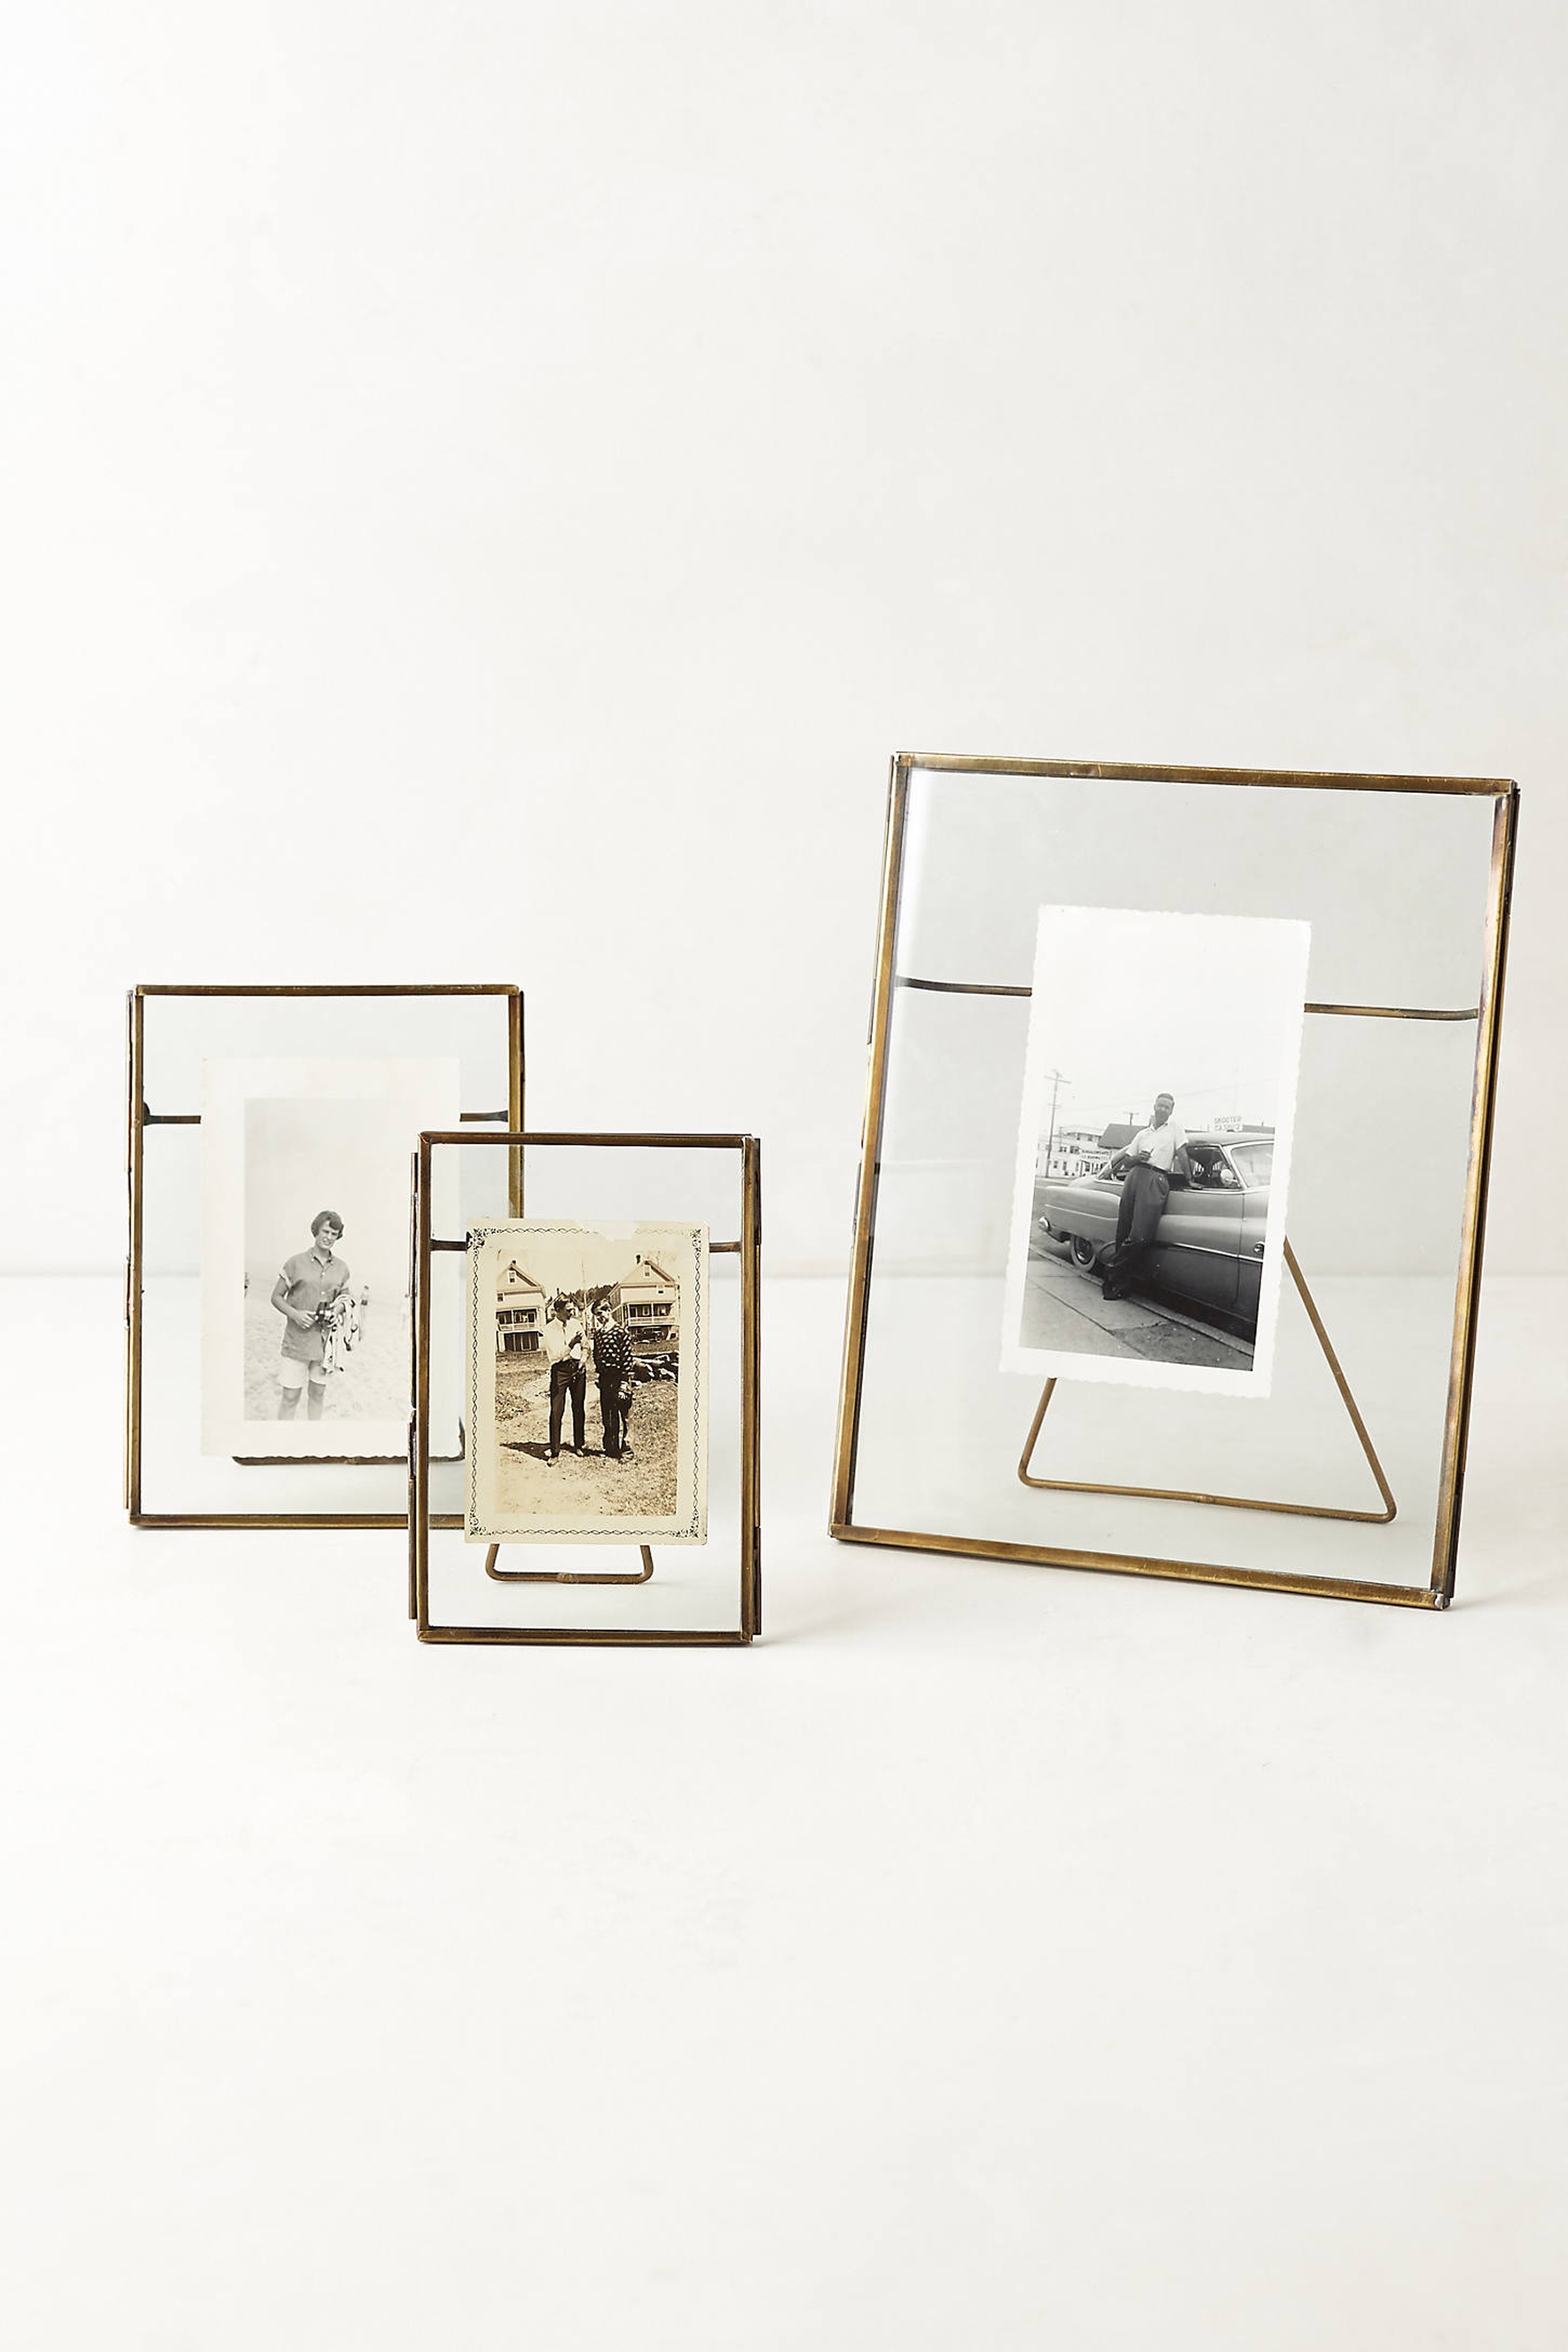 Pressed Glass Photo Frame By Anthropologie in Brown Size 5 X 7 - Anthropologie